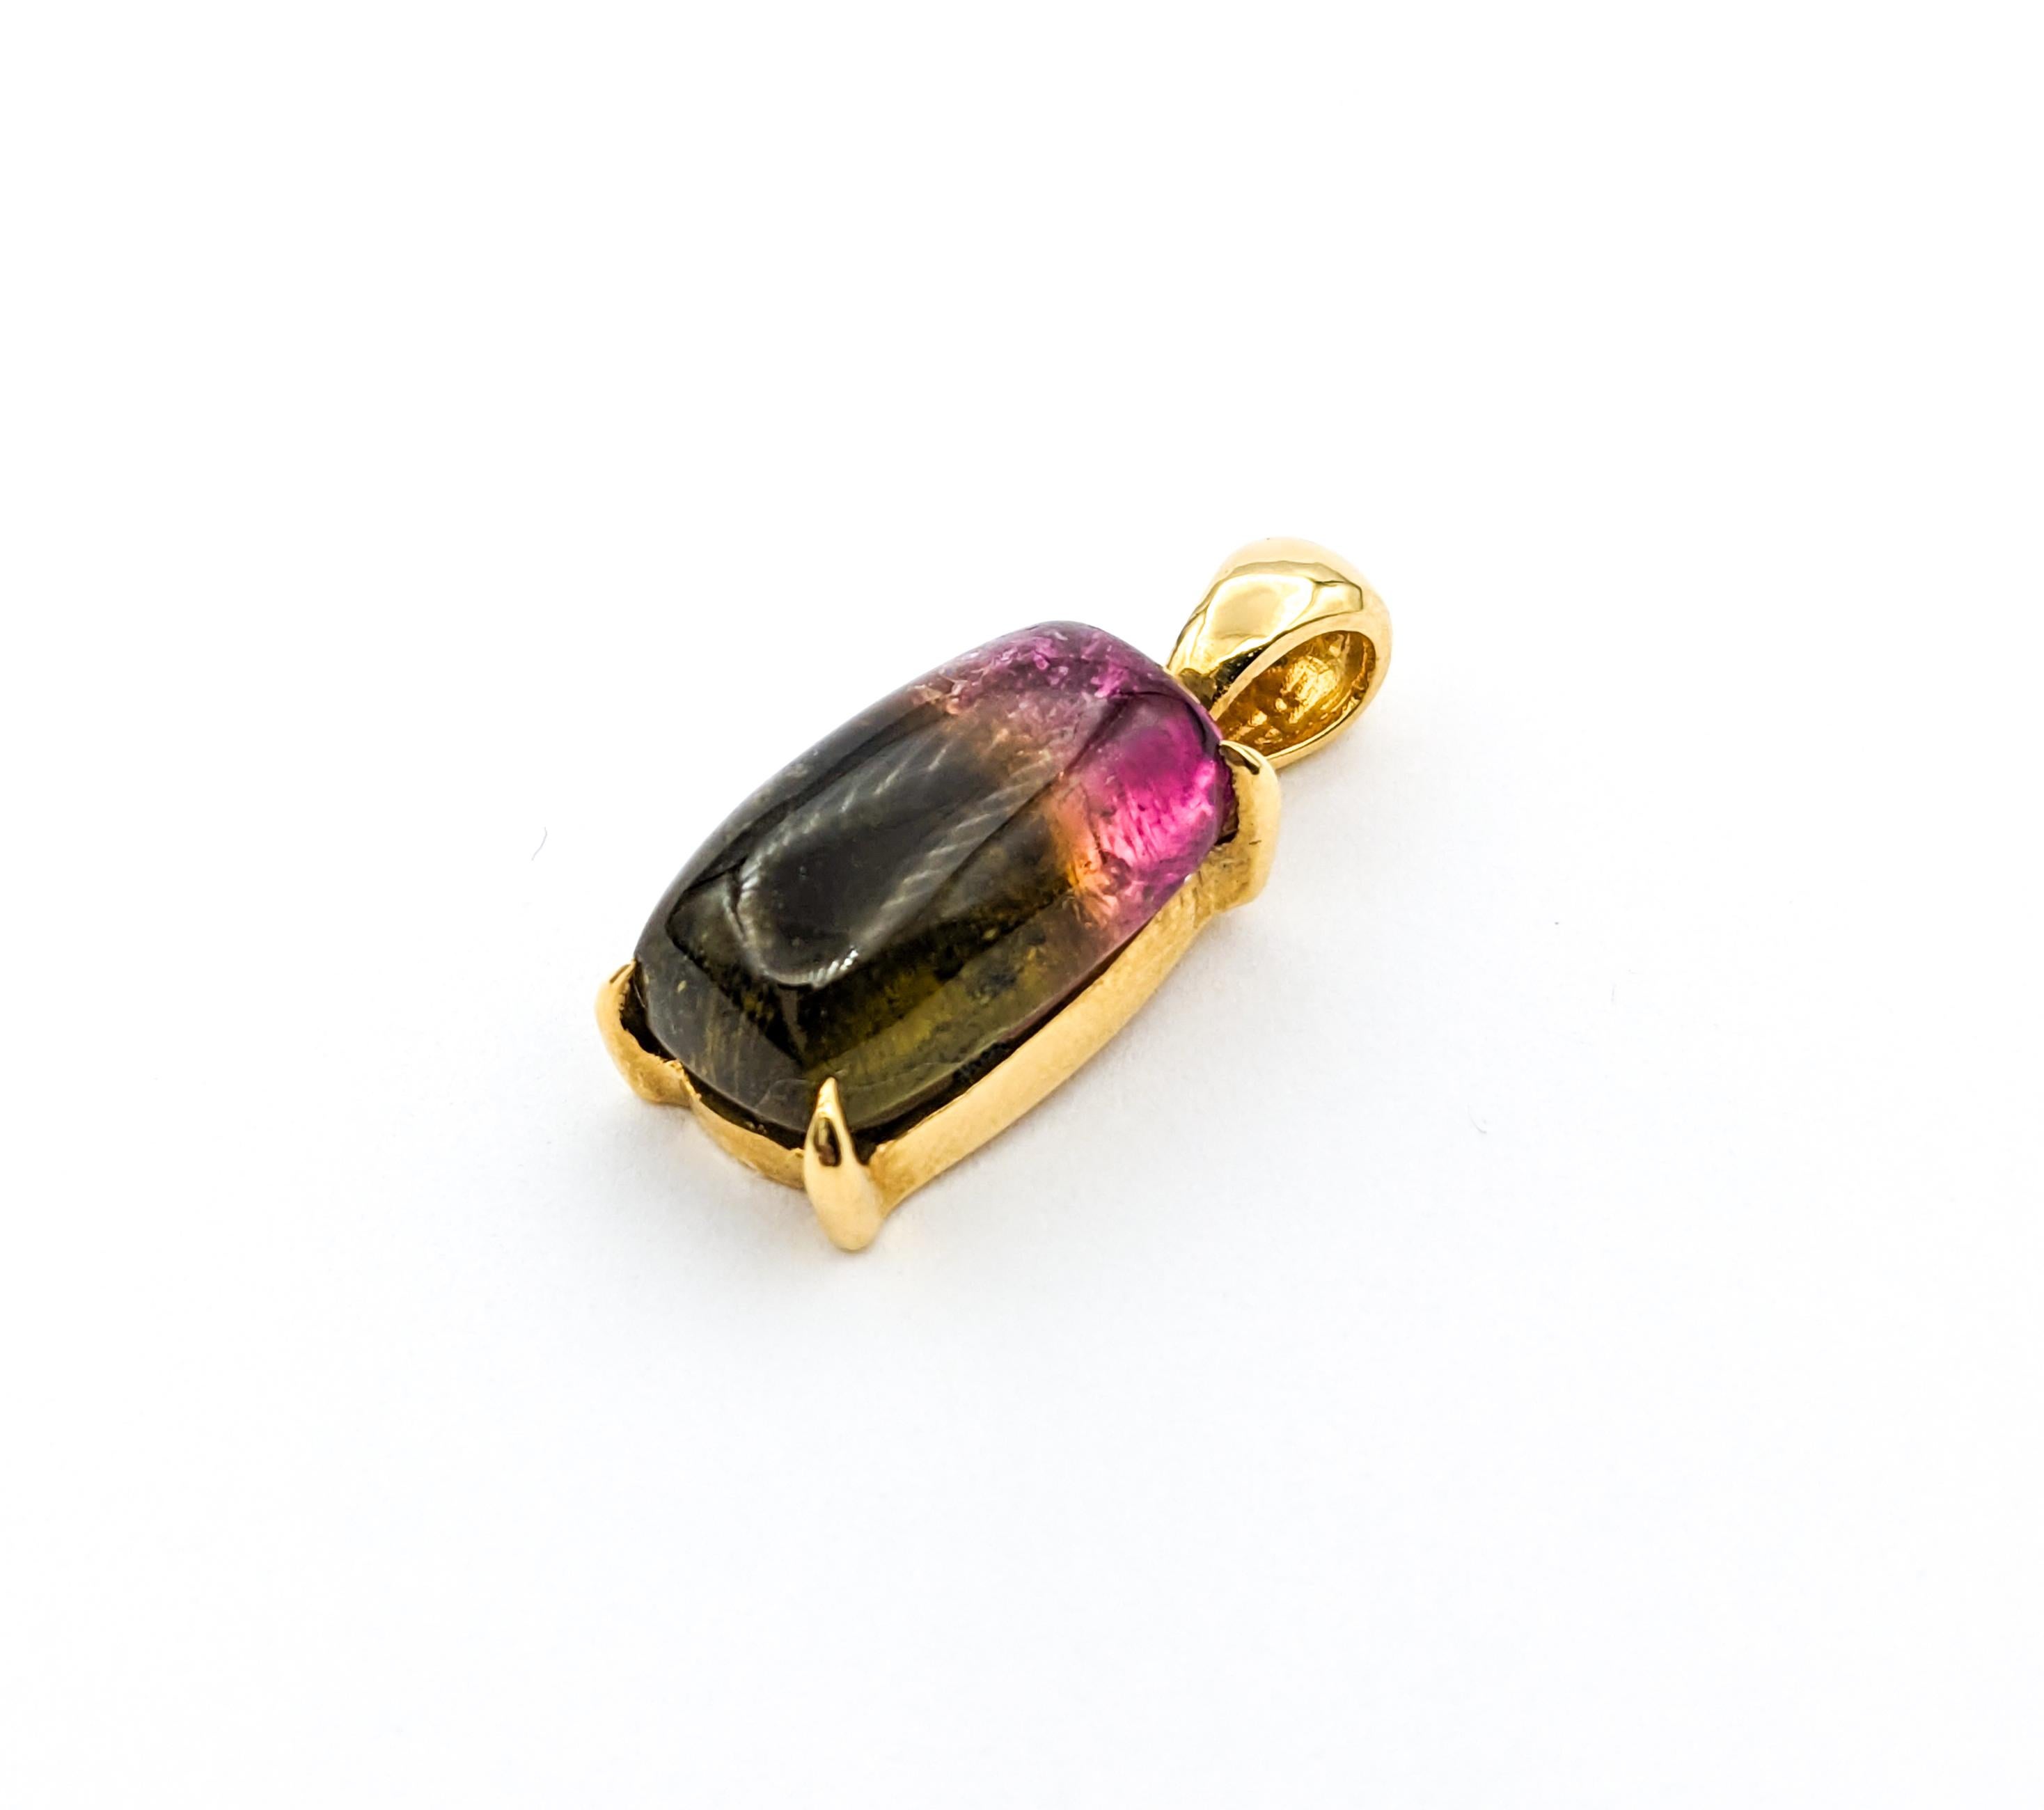 5ct Cabochon Watermelon Tourmaline Pendant In Yellow Gold In Excellent Condition For Sale In Bloomington, MN